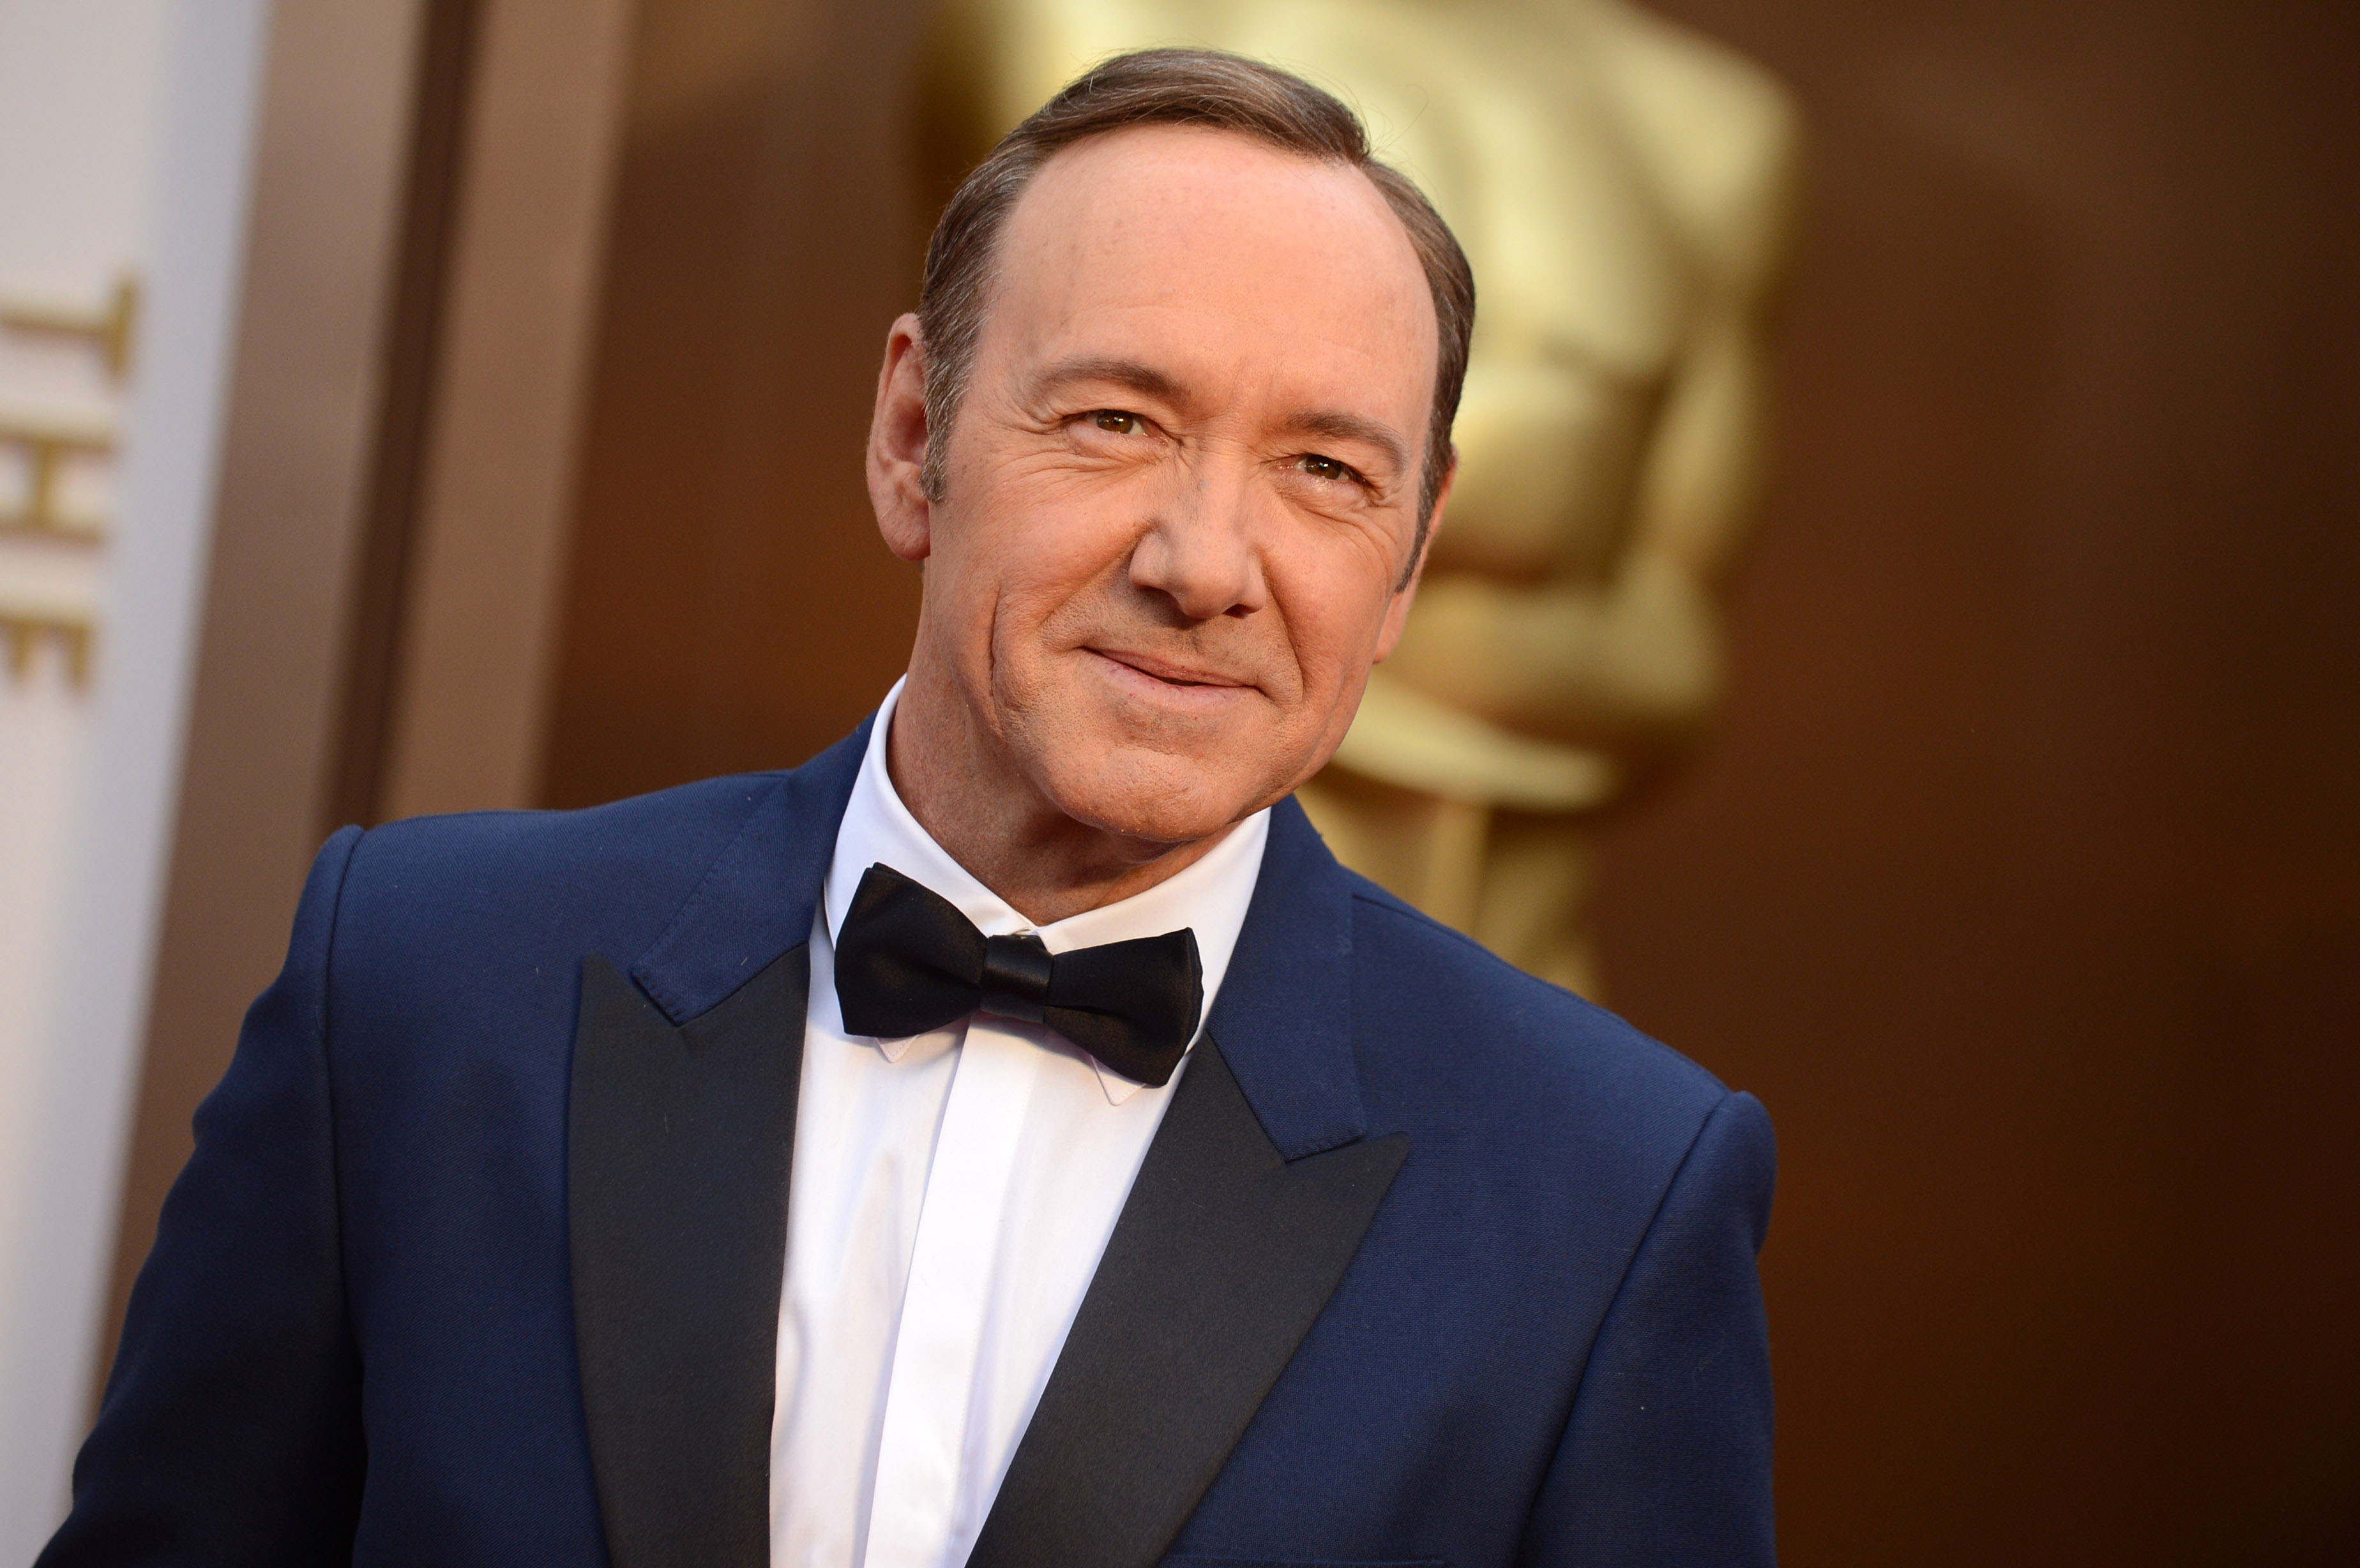 Kevin Spacey on the ruthless roots of ‘House of Cards’